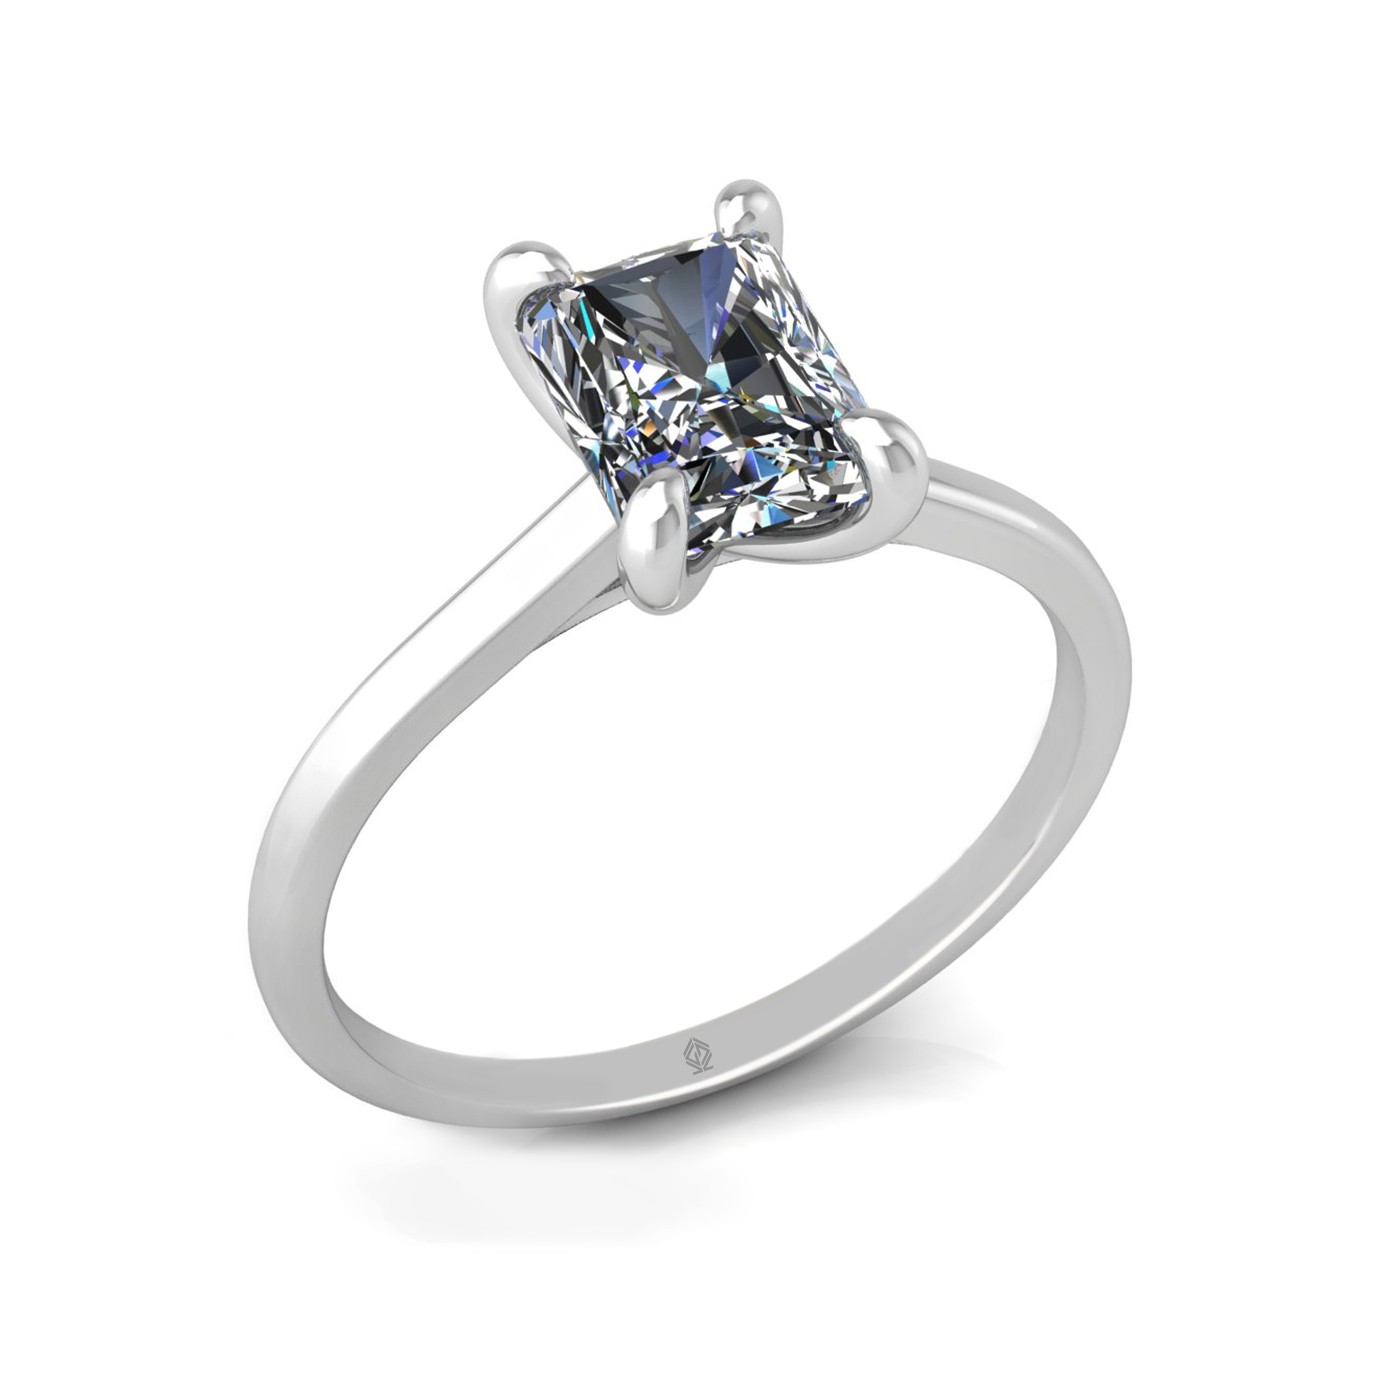 18k white gold  1,50 ct 4 prongs solitaire radiant cut diamond engagement ring with whisper thin band